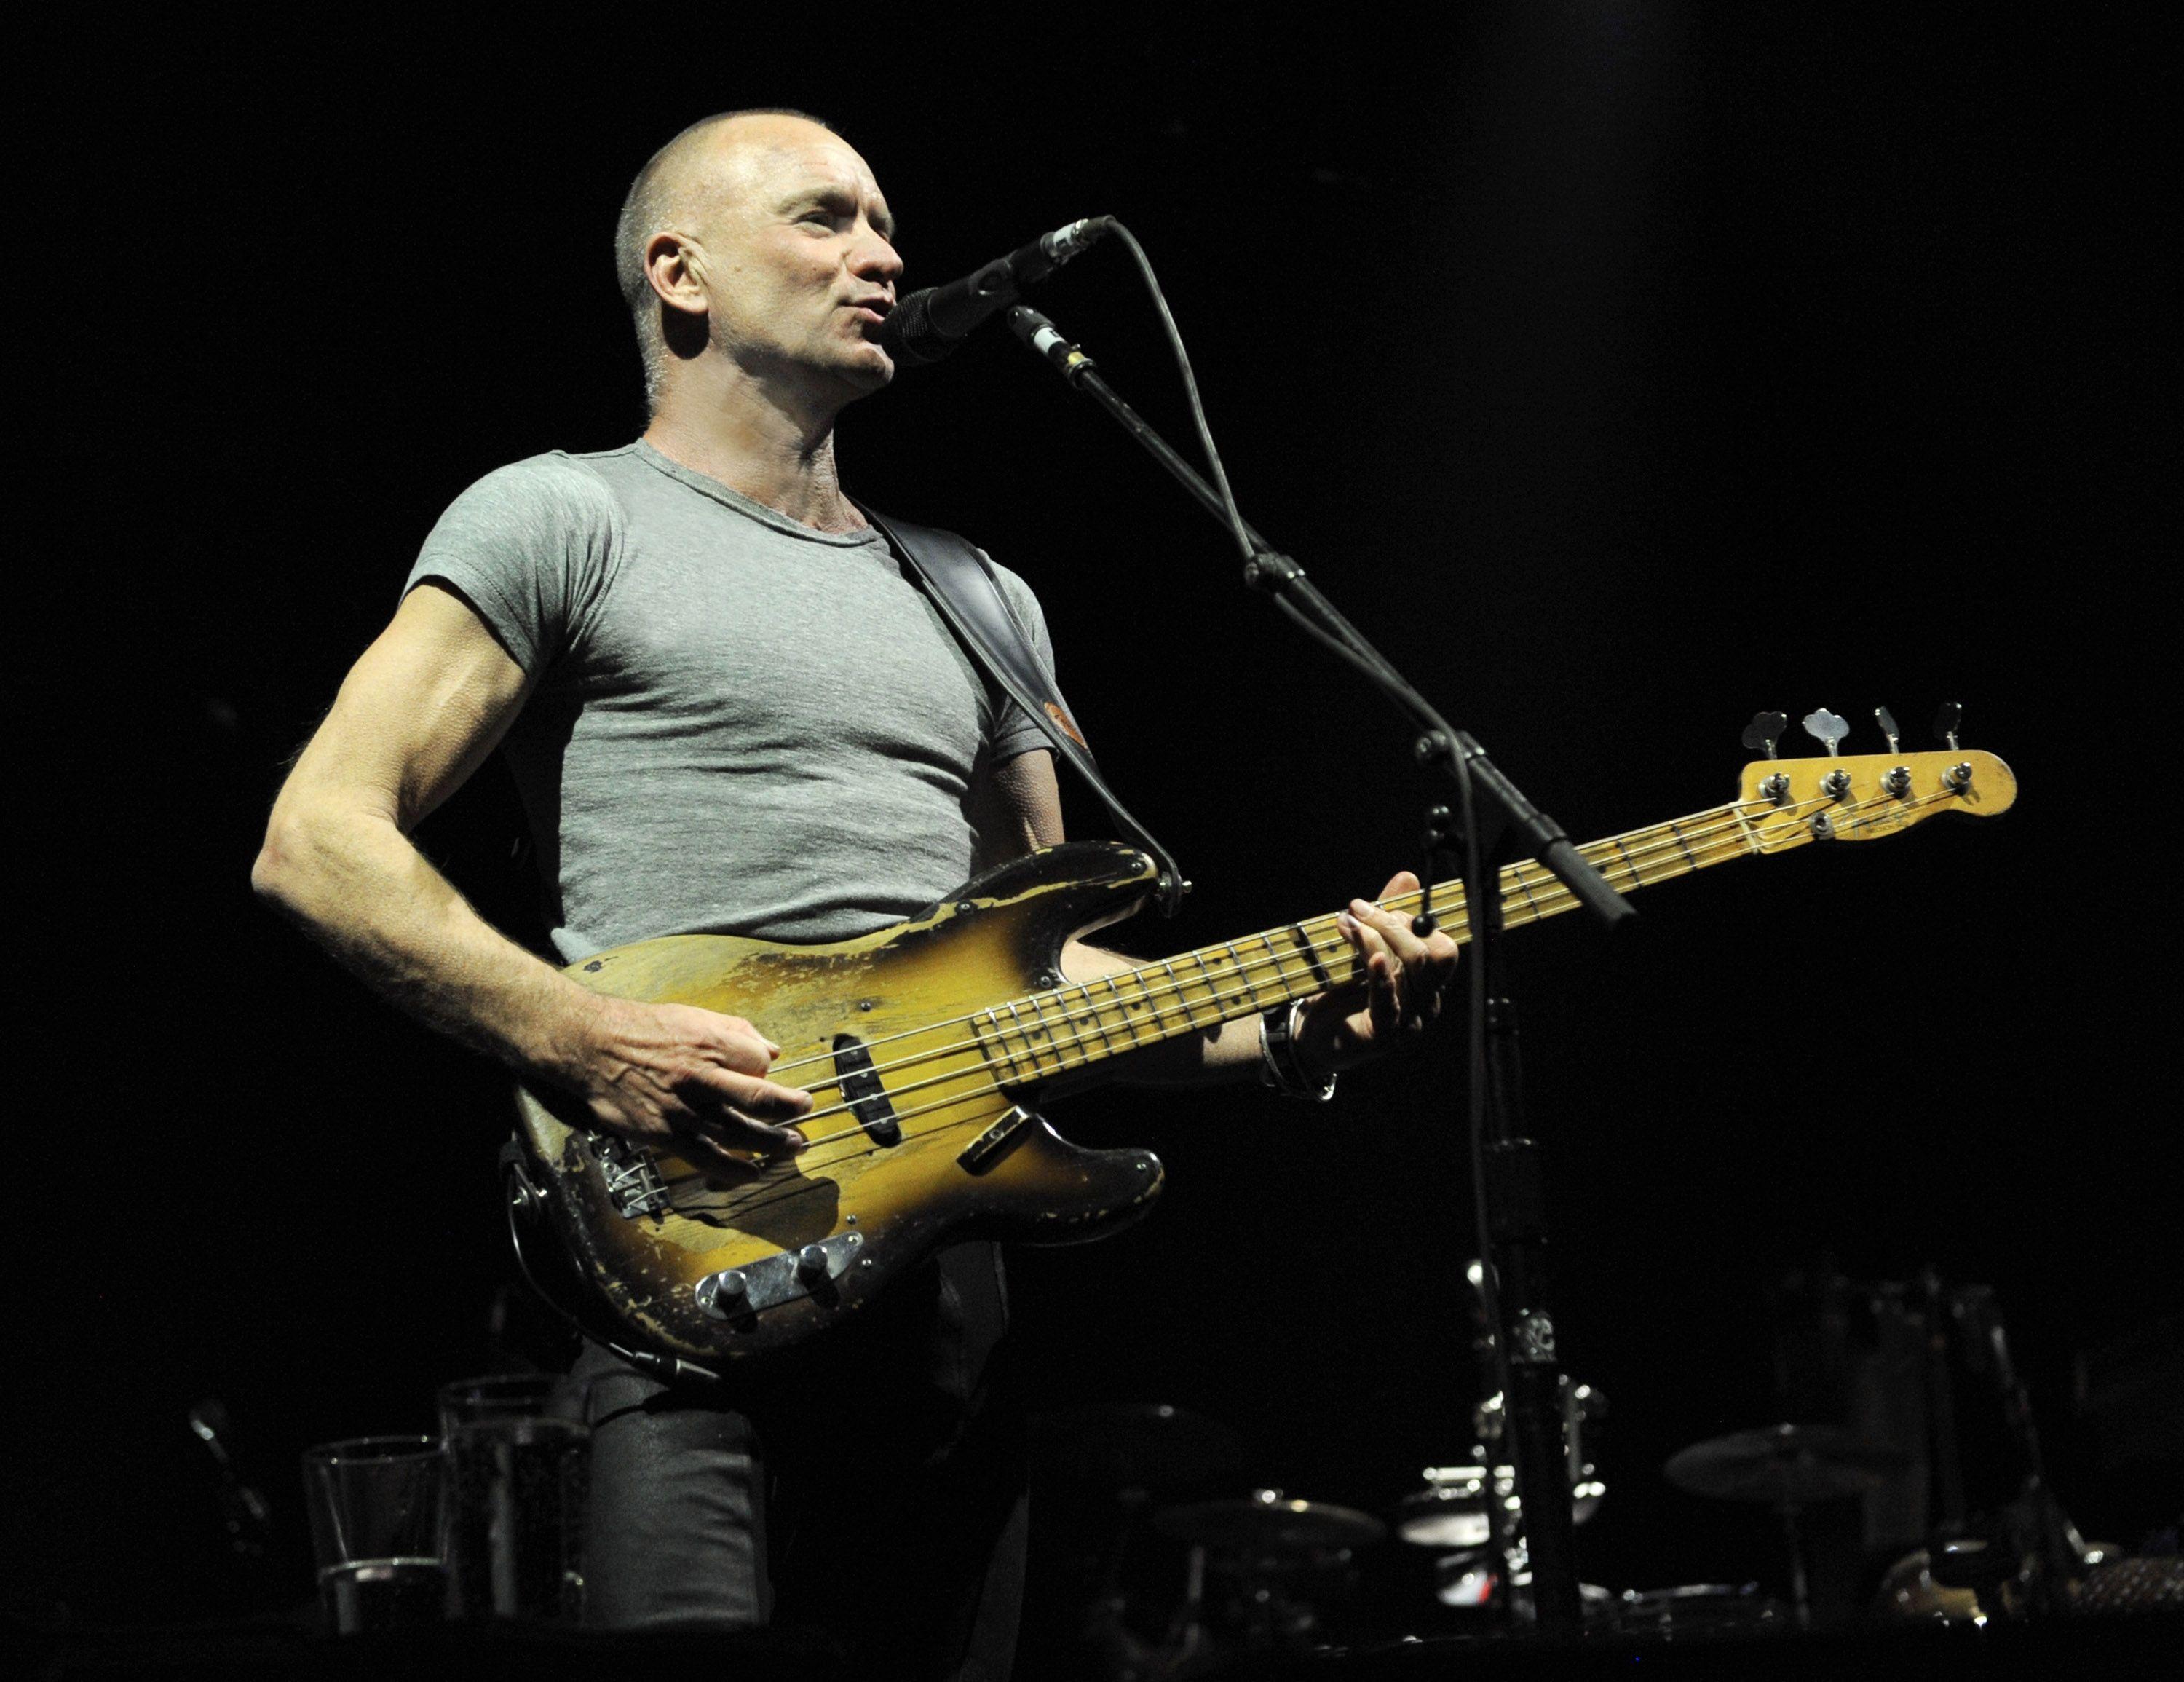 Sting's first pop album in 13 years will include songs about